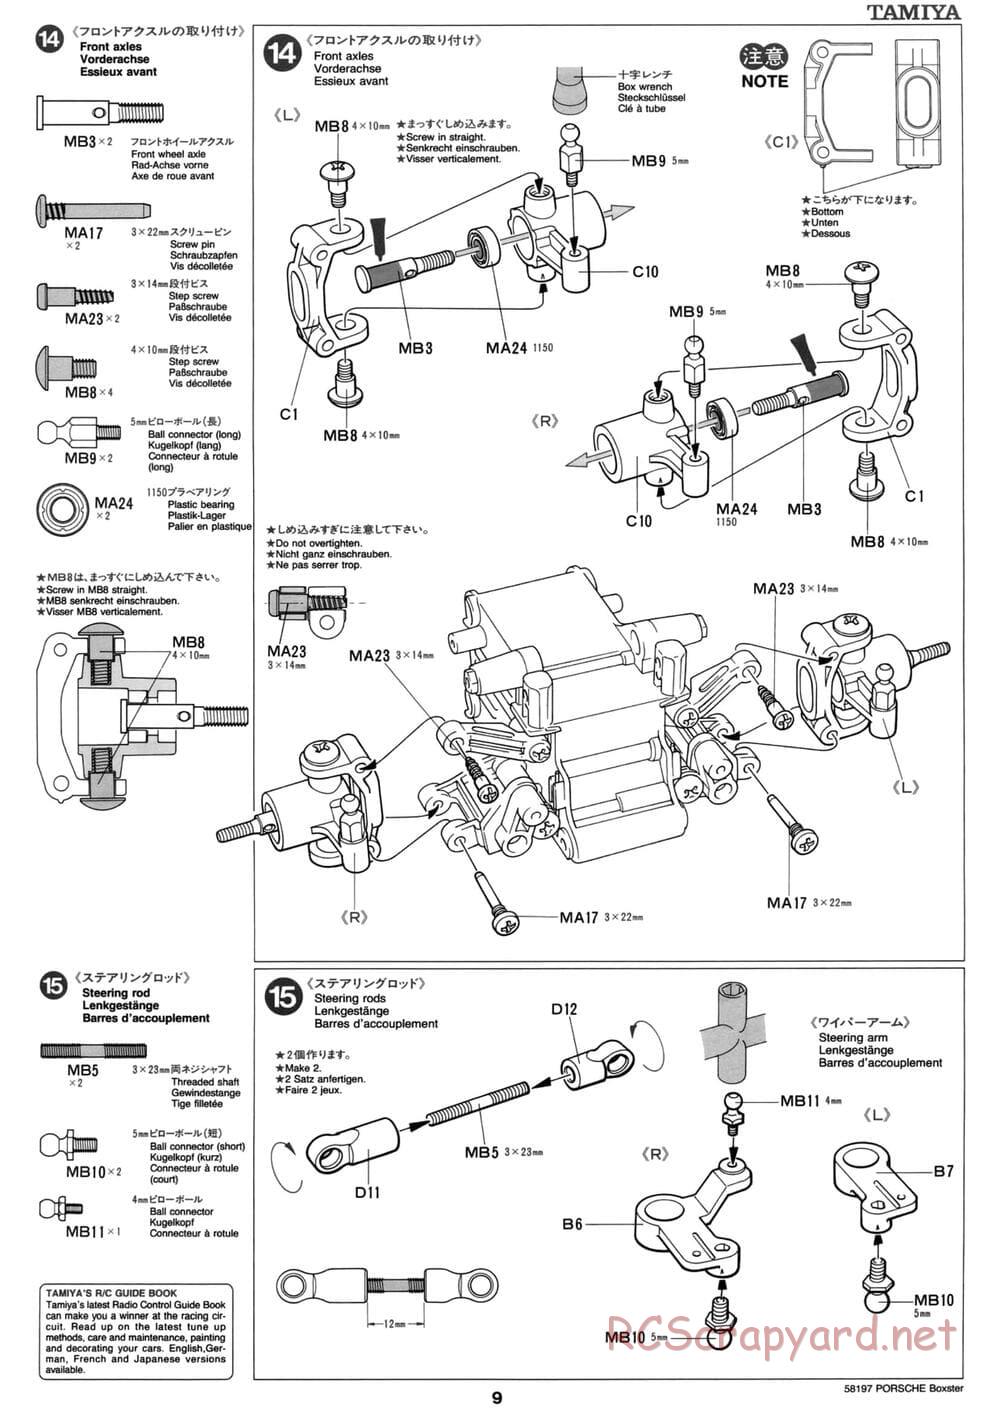 Tamiya - Porsche Boxster - M02L Chassis - Manual - Page 9